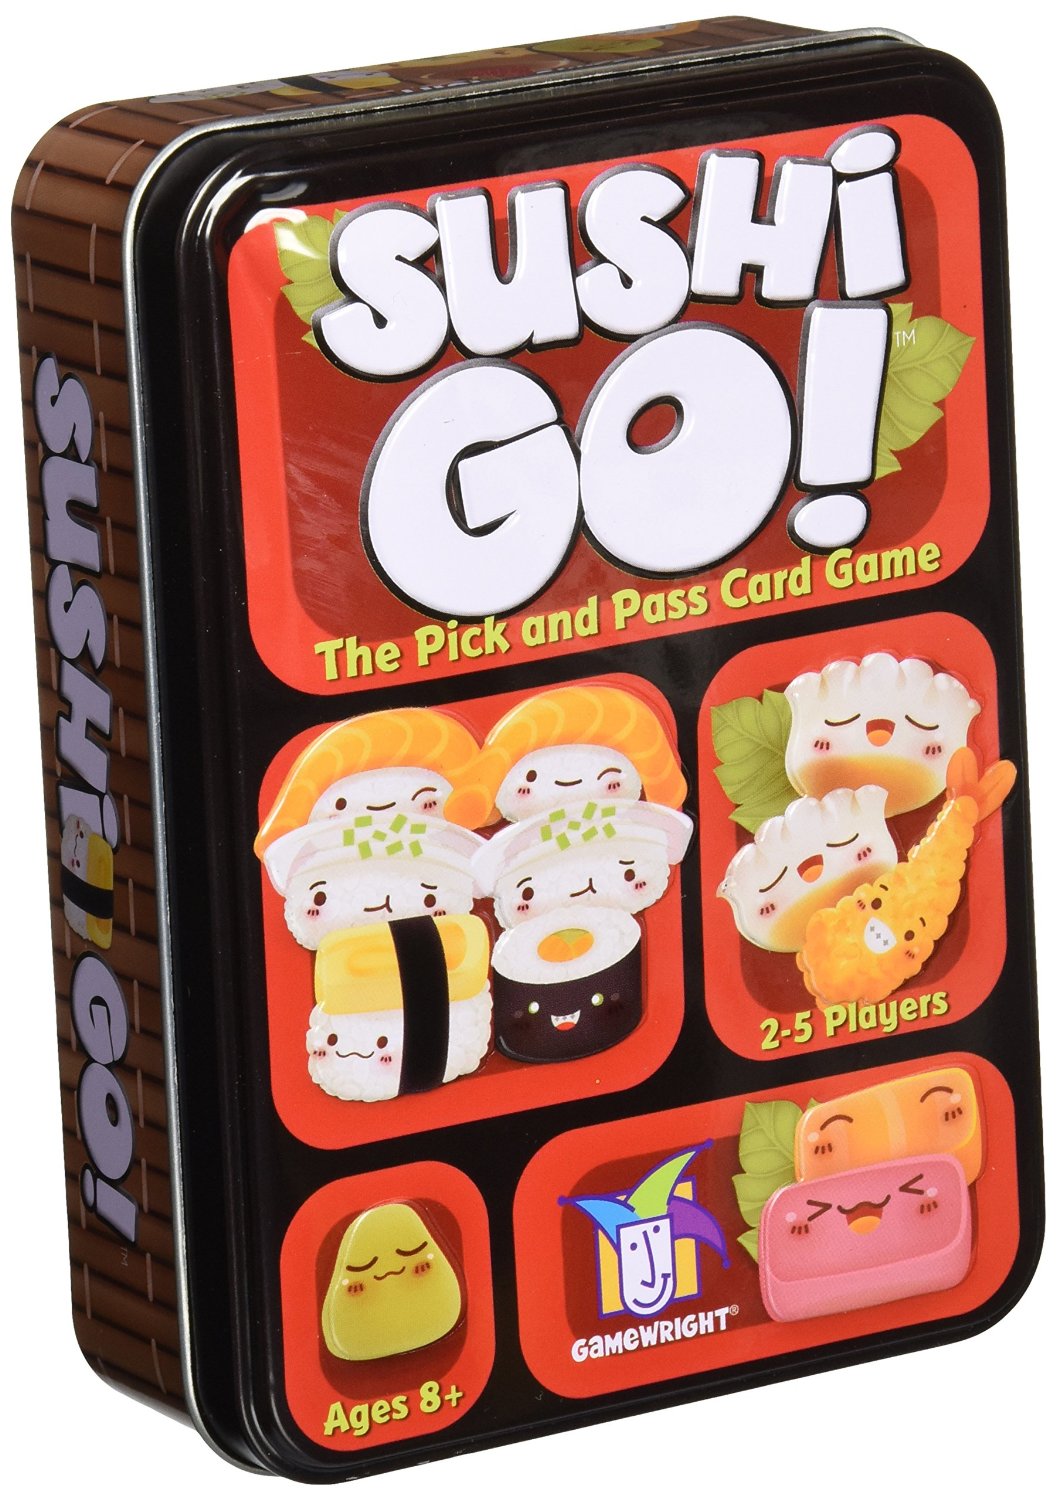 Sushi Go! – The Pick and Pass Card Game – Just $10.27!